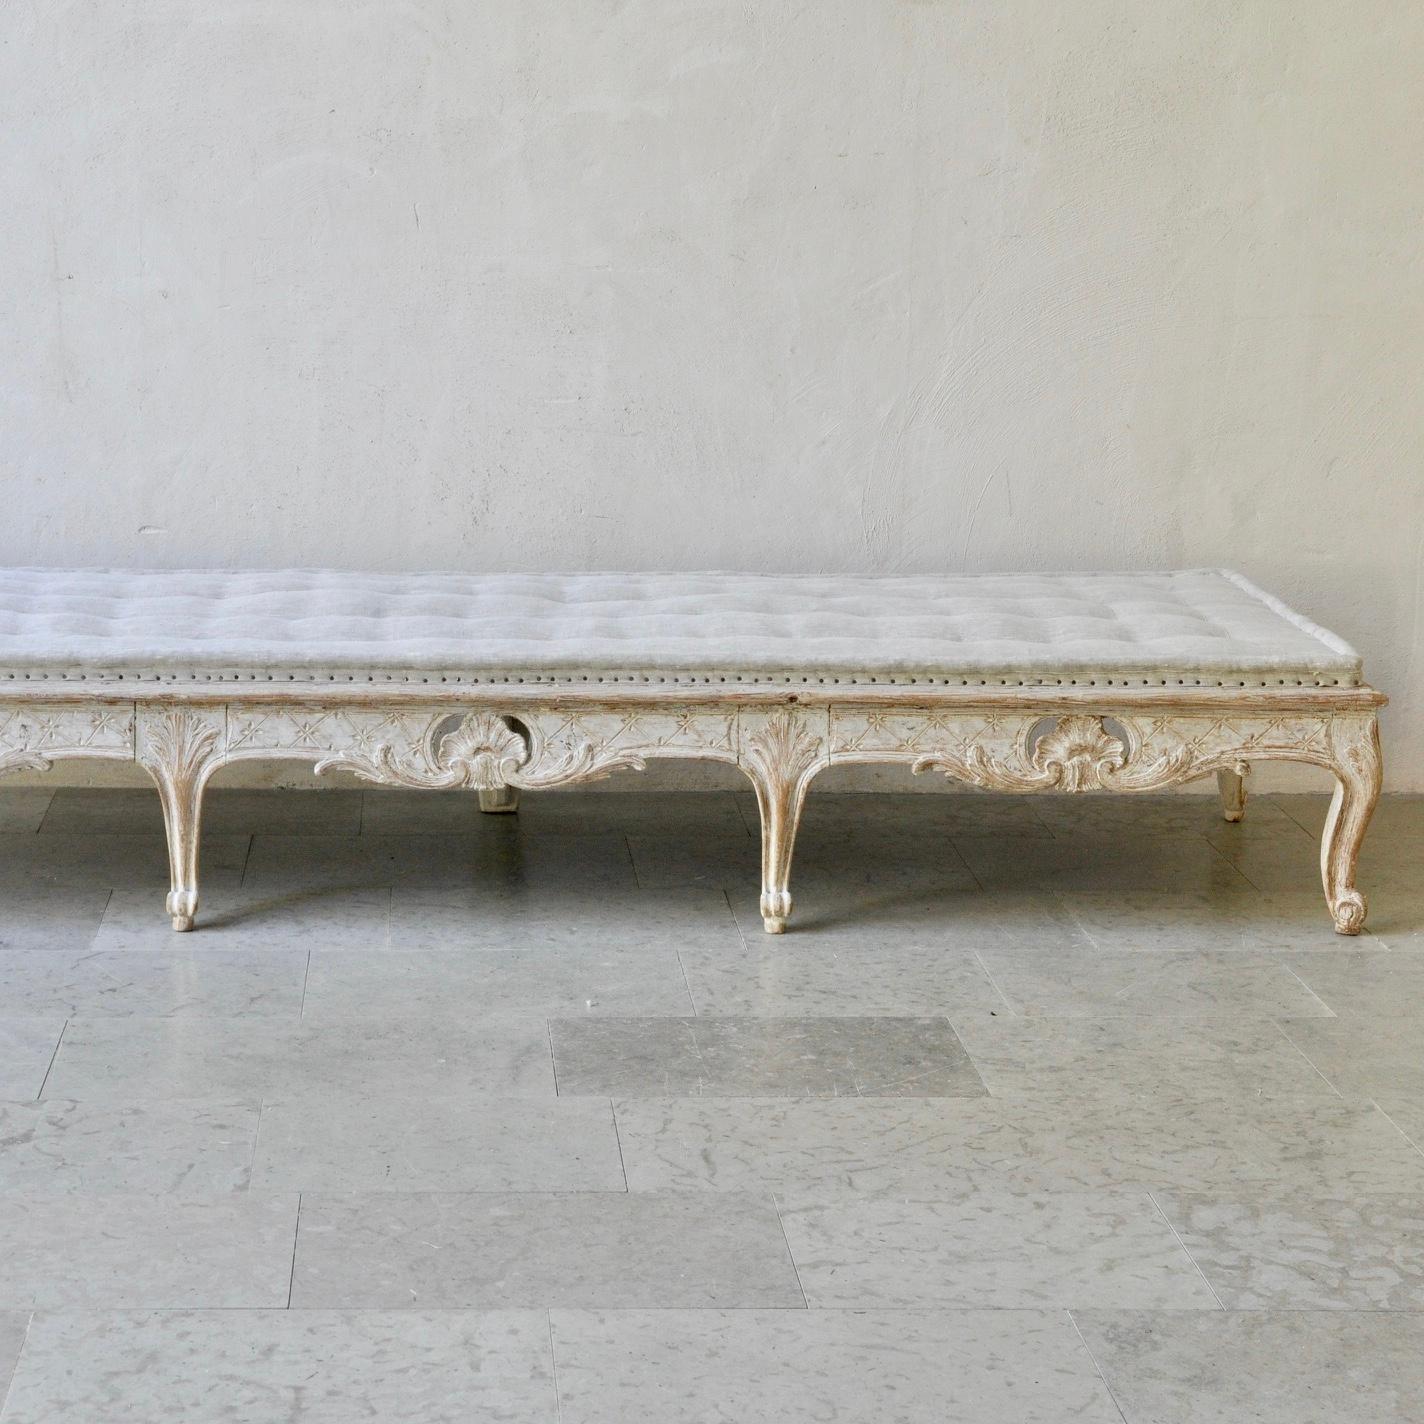 Large 18th century Swedish period Rococo long stool/bench - classical Rococo hand carved shell decoration to front and both ends (plain to the back) - traditional tufted Swedish upholstery in a neutral linen - original old paint has been refreshed